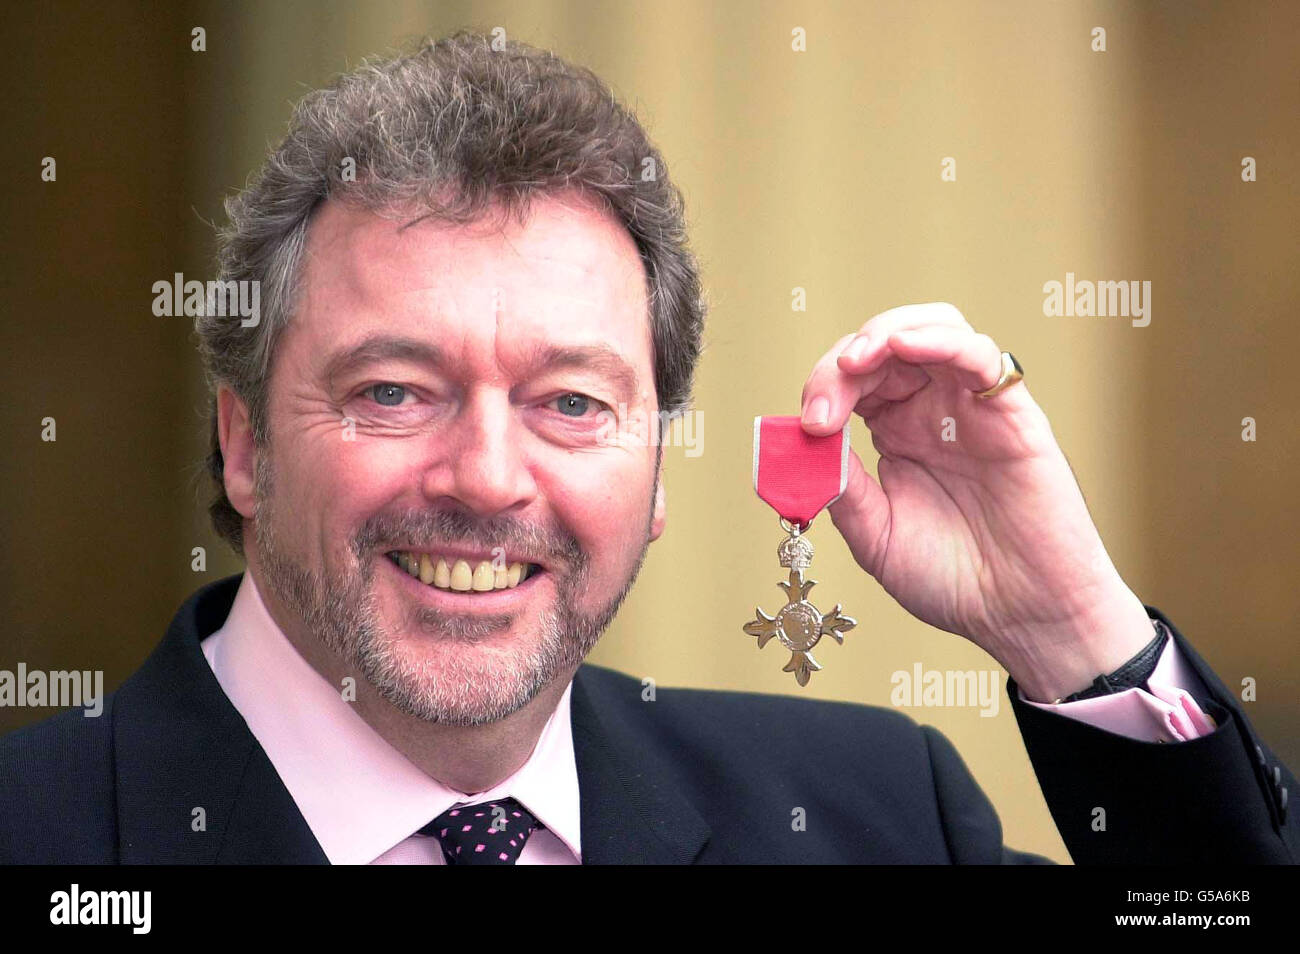 Television personality Jeremy Beadle at Buckingham Palace, where he recieved an OBE from the Queen. The TV practical joker viewers loved to hate received his honour for services to charity, in particular the Foundation for Children with Leukaemia. *... Over the last decade he has helped raise around 10 million for good causes. From the early-1980s to the mid-90s, Beadle was a TV phenomenon with Game For A laugh, Beadle's About, and You've Been Framed. Stock Photo